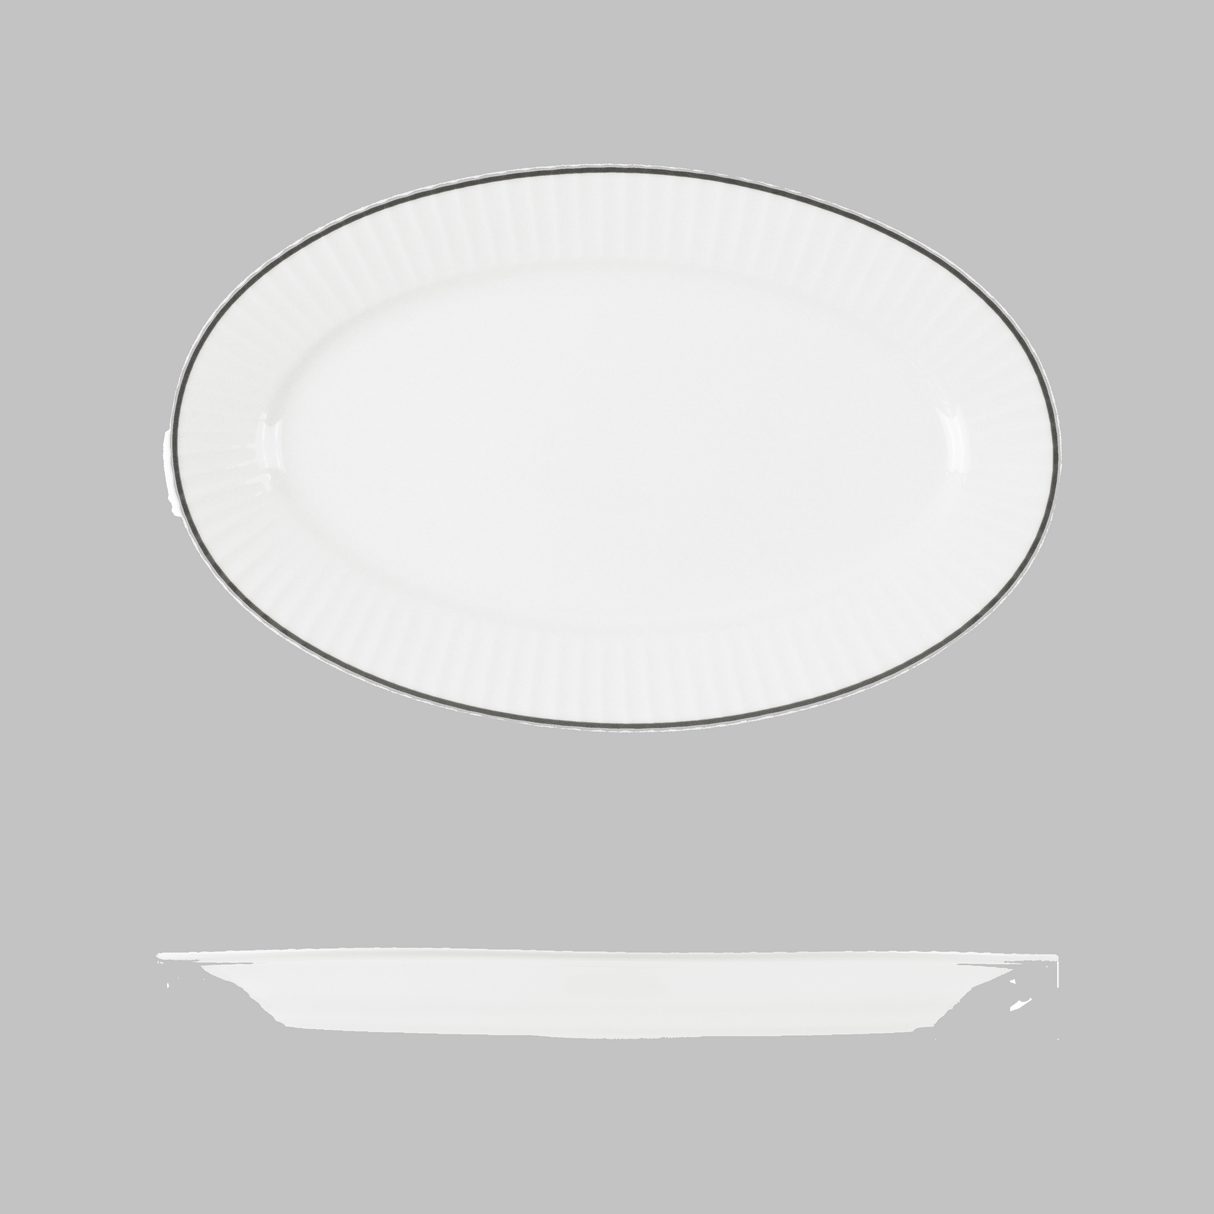 Oval Plate Wide Rim 320 x 200mm - Pack of 12